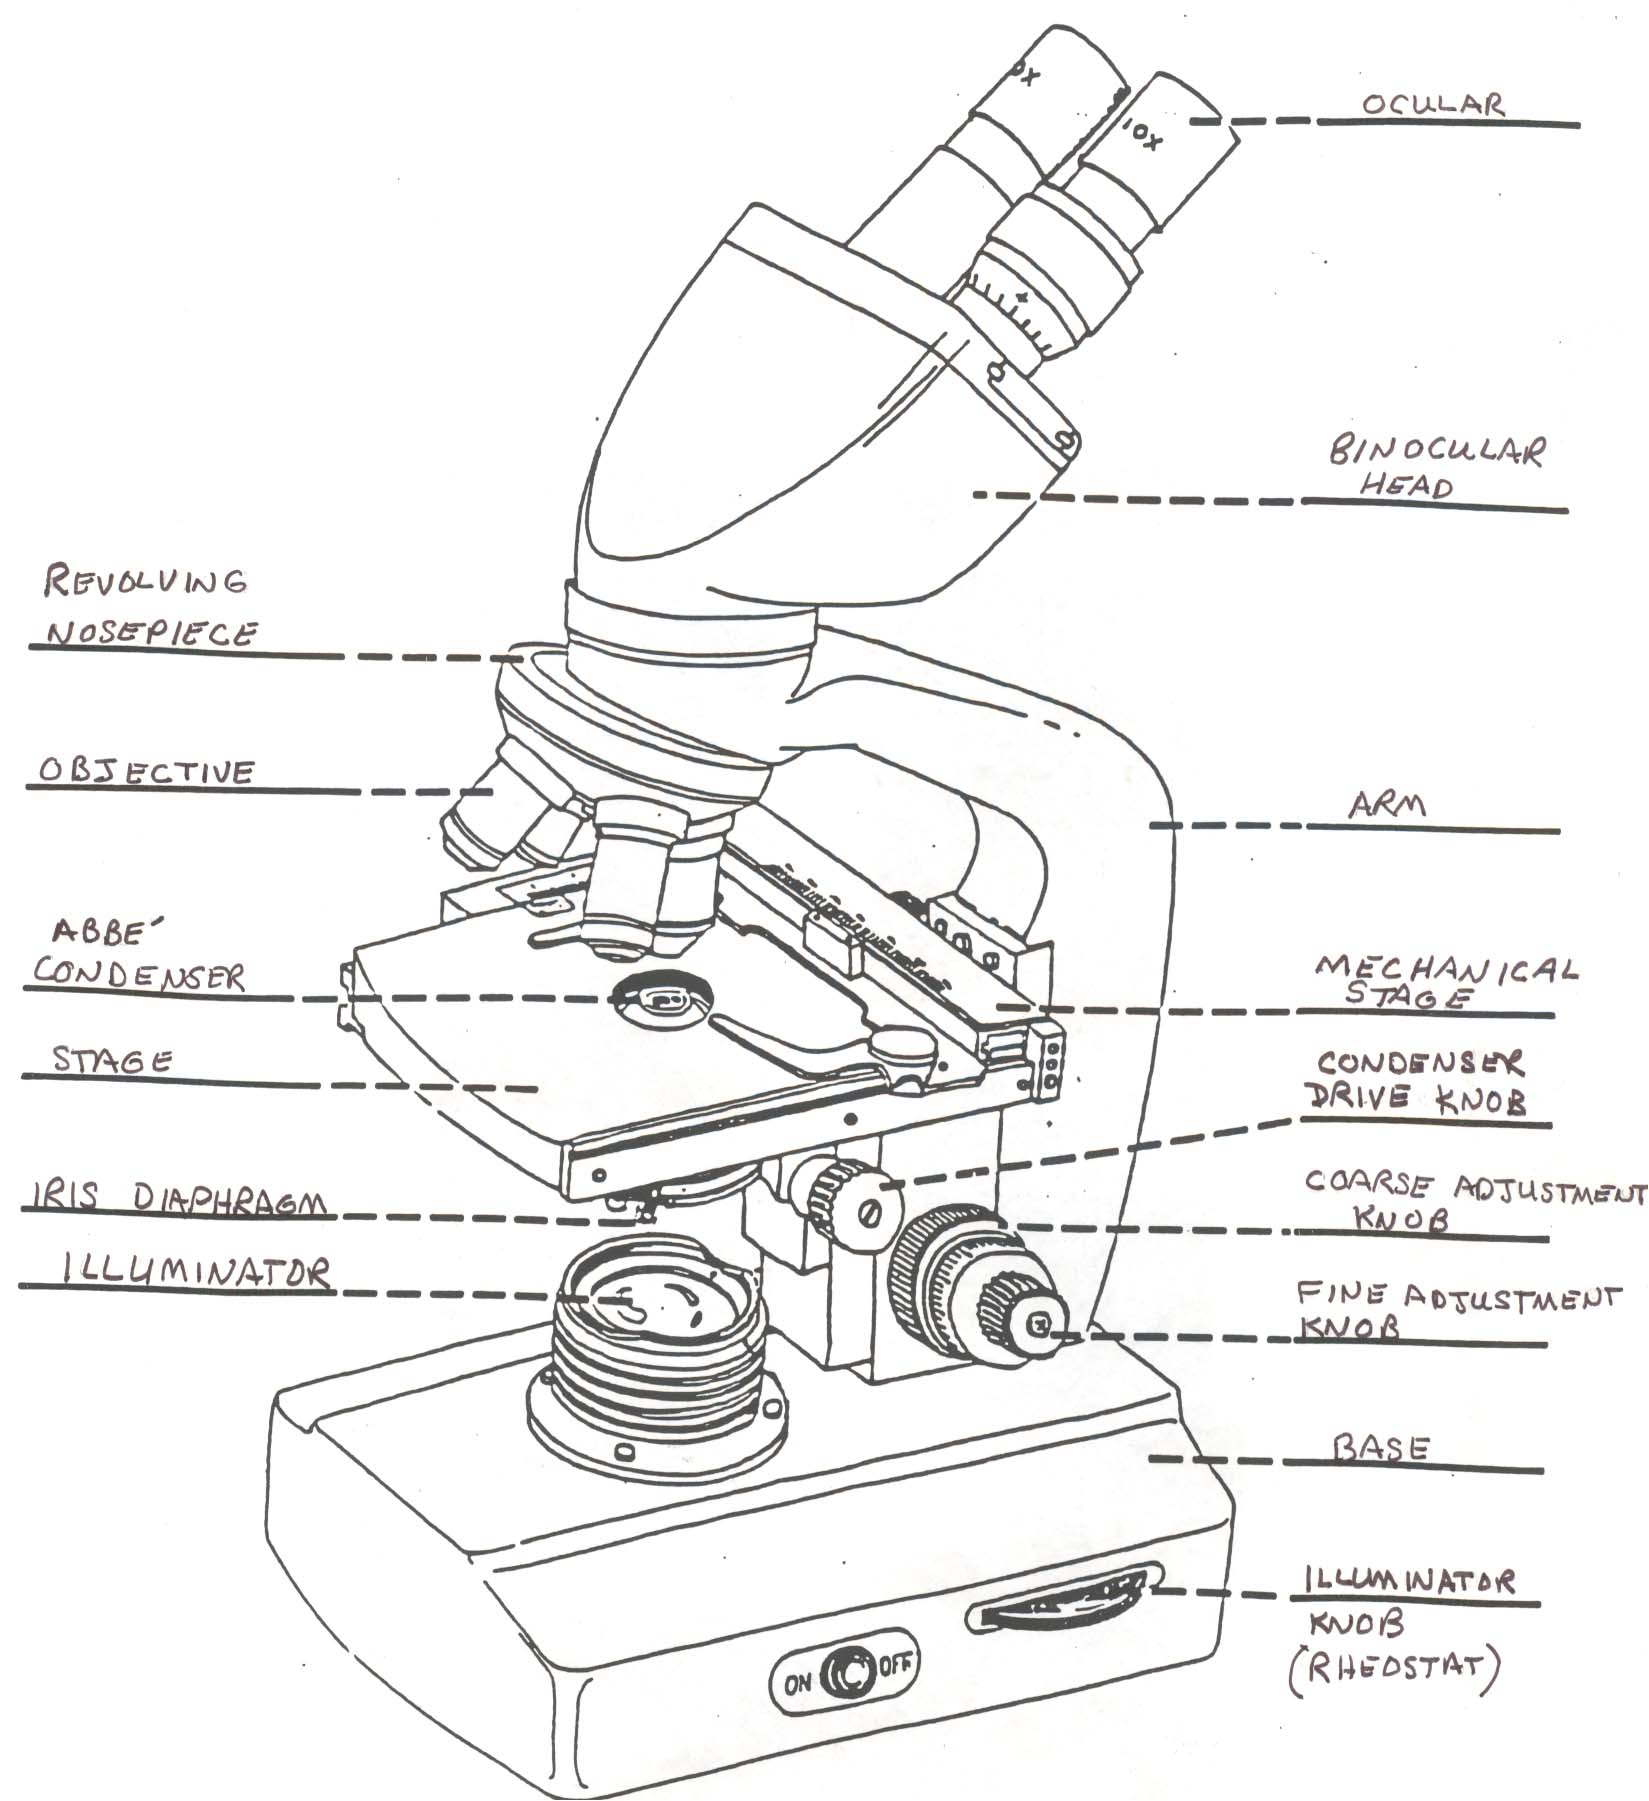 Simple Microscope Drawing at GetDrawings | Free download